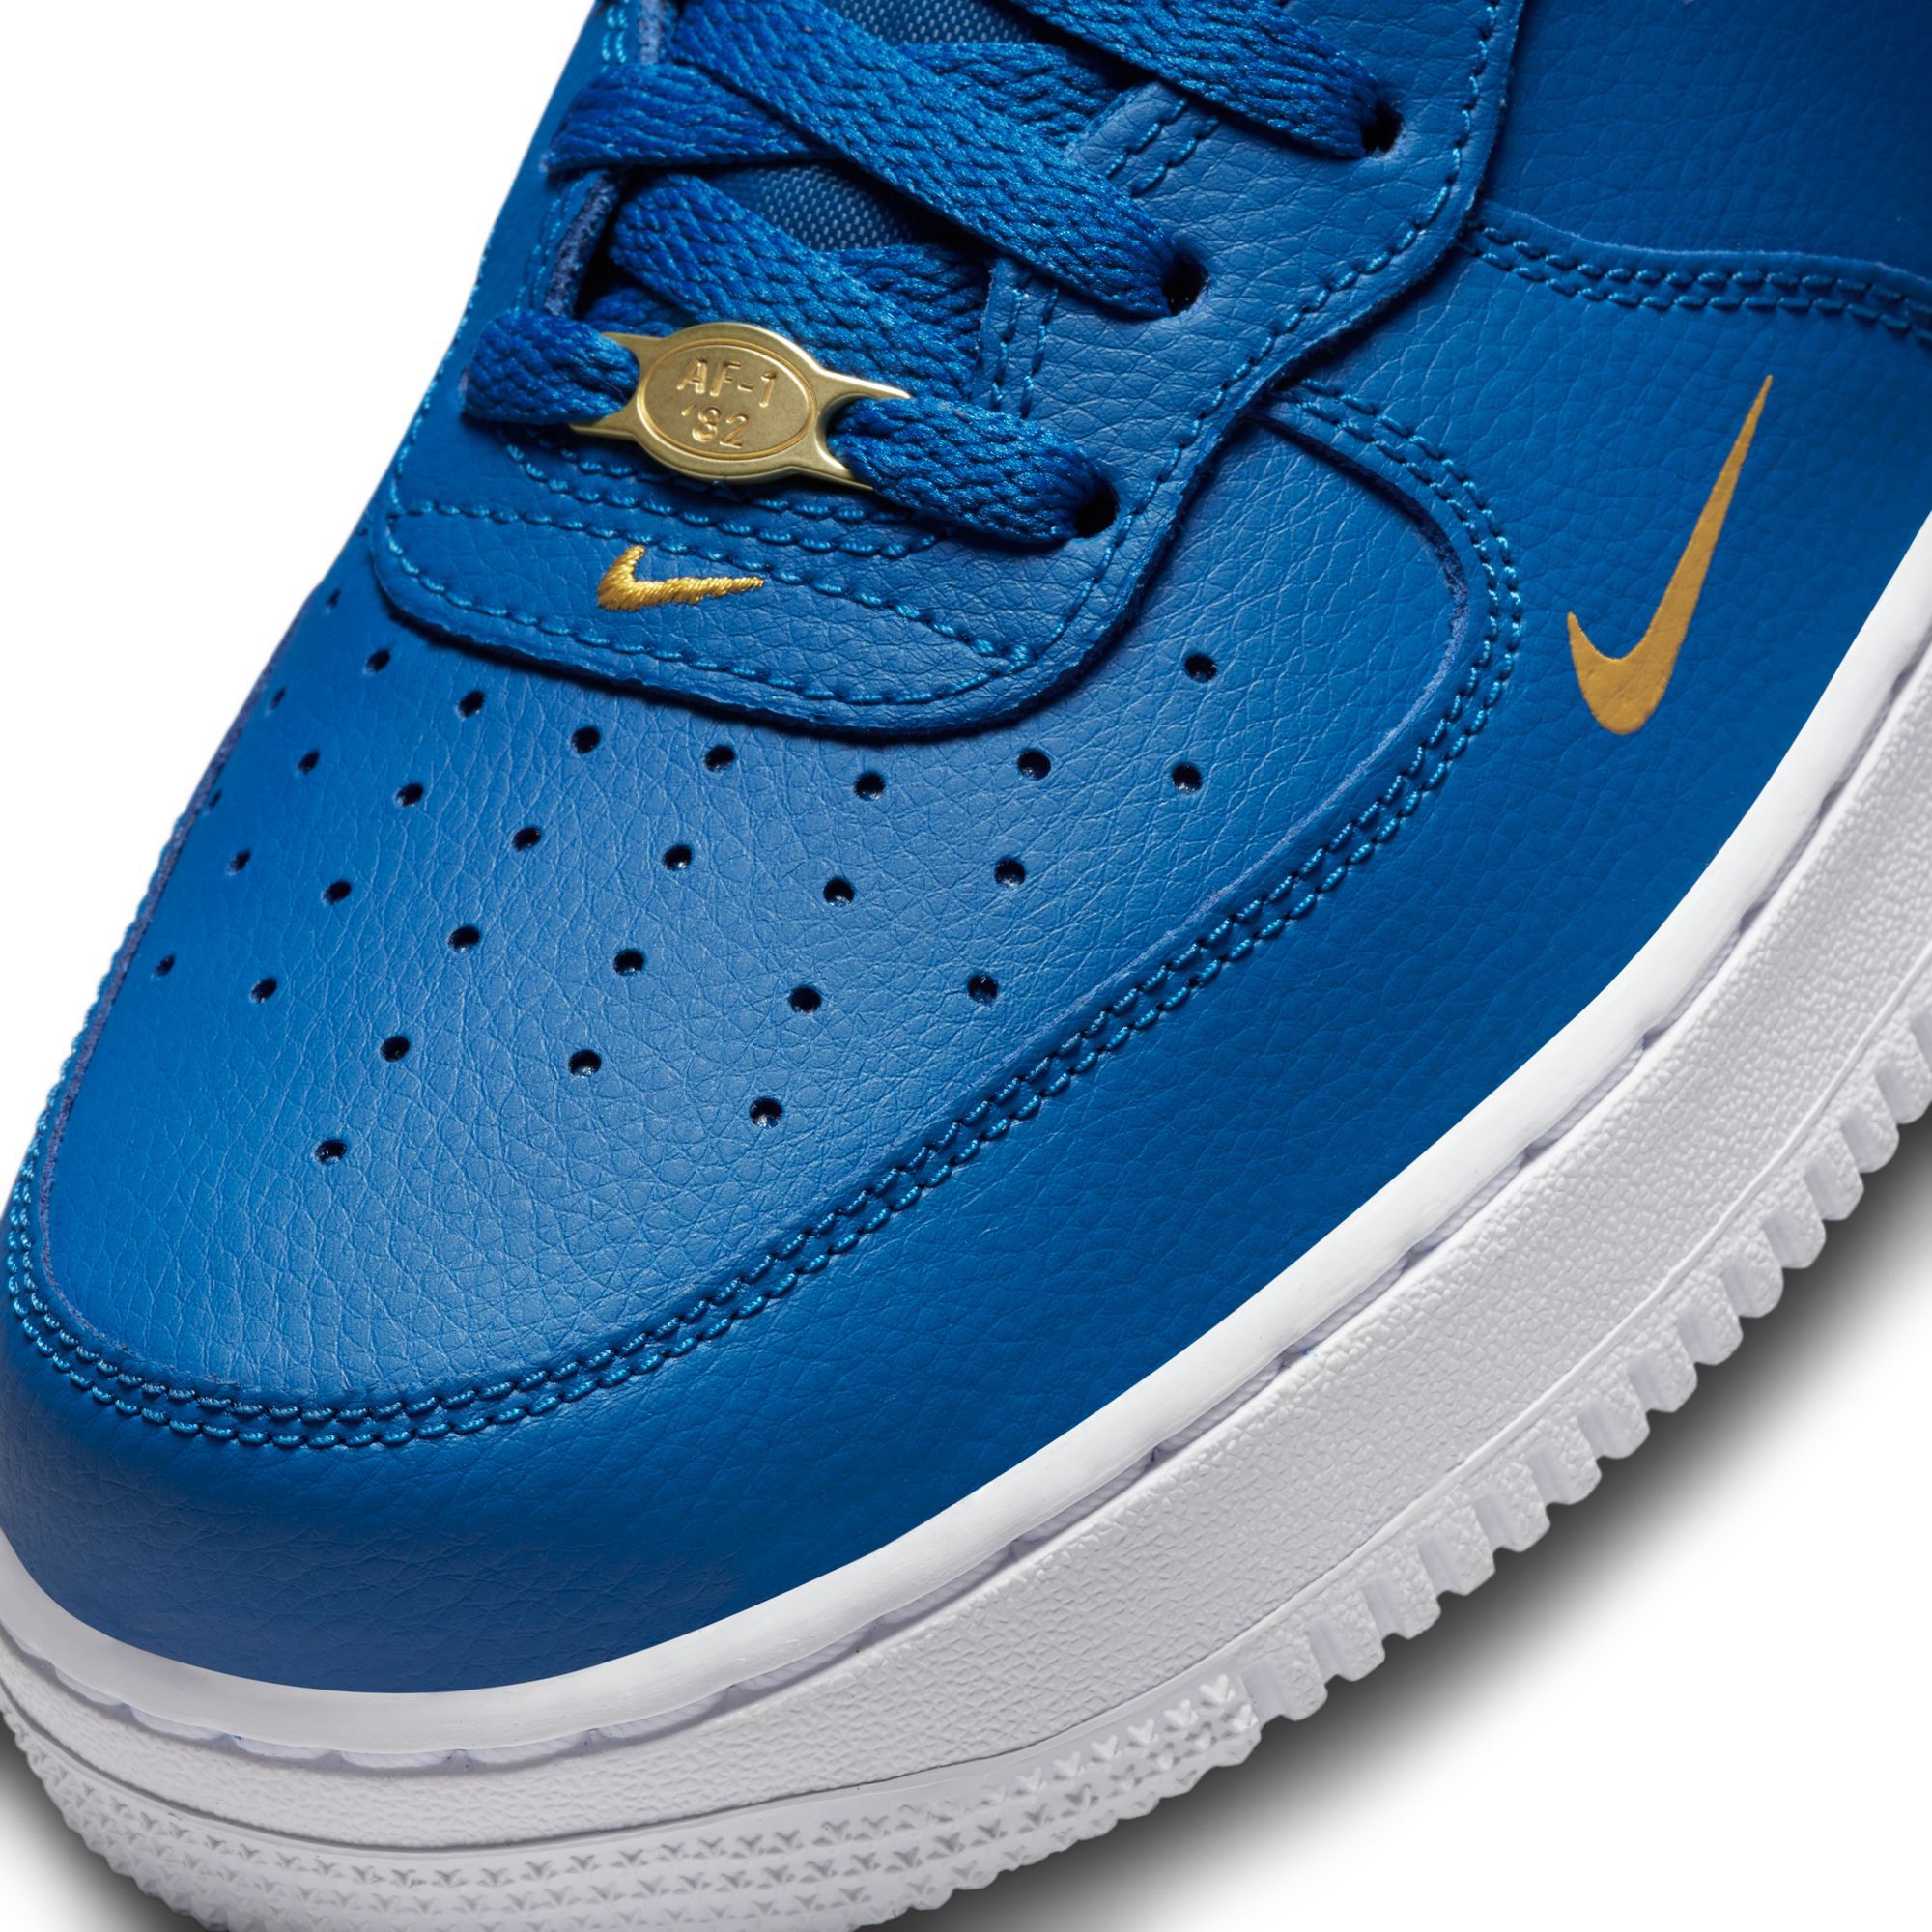 Buy Nike Air Force 1 Mid 07 LV8 Men's Casual Shoes Air Force 1 Mid 07 40th  Anniversary Blue Jay LV8 DR9513-400 [Parallel Import] from Japan - Buy  authentic Plus exclusive items from Japan